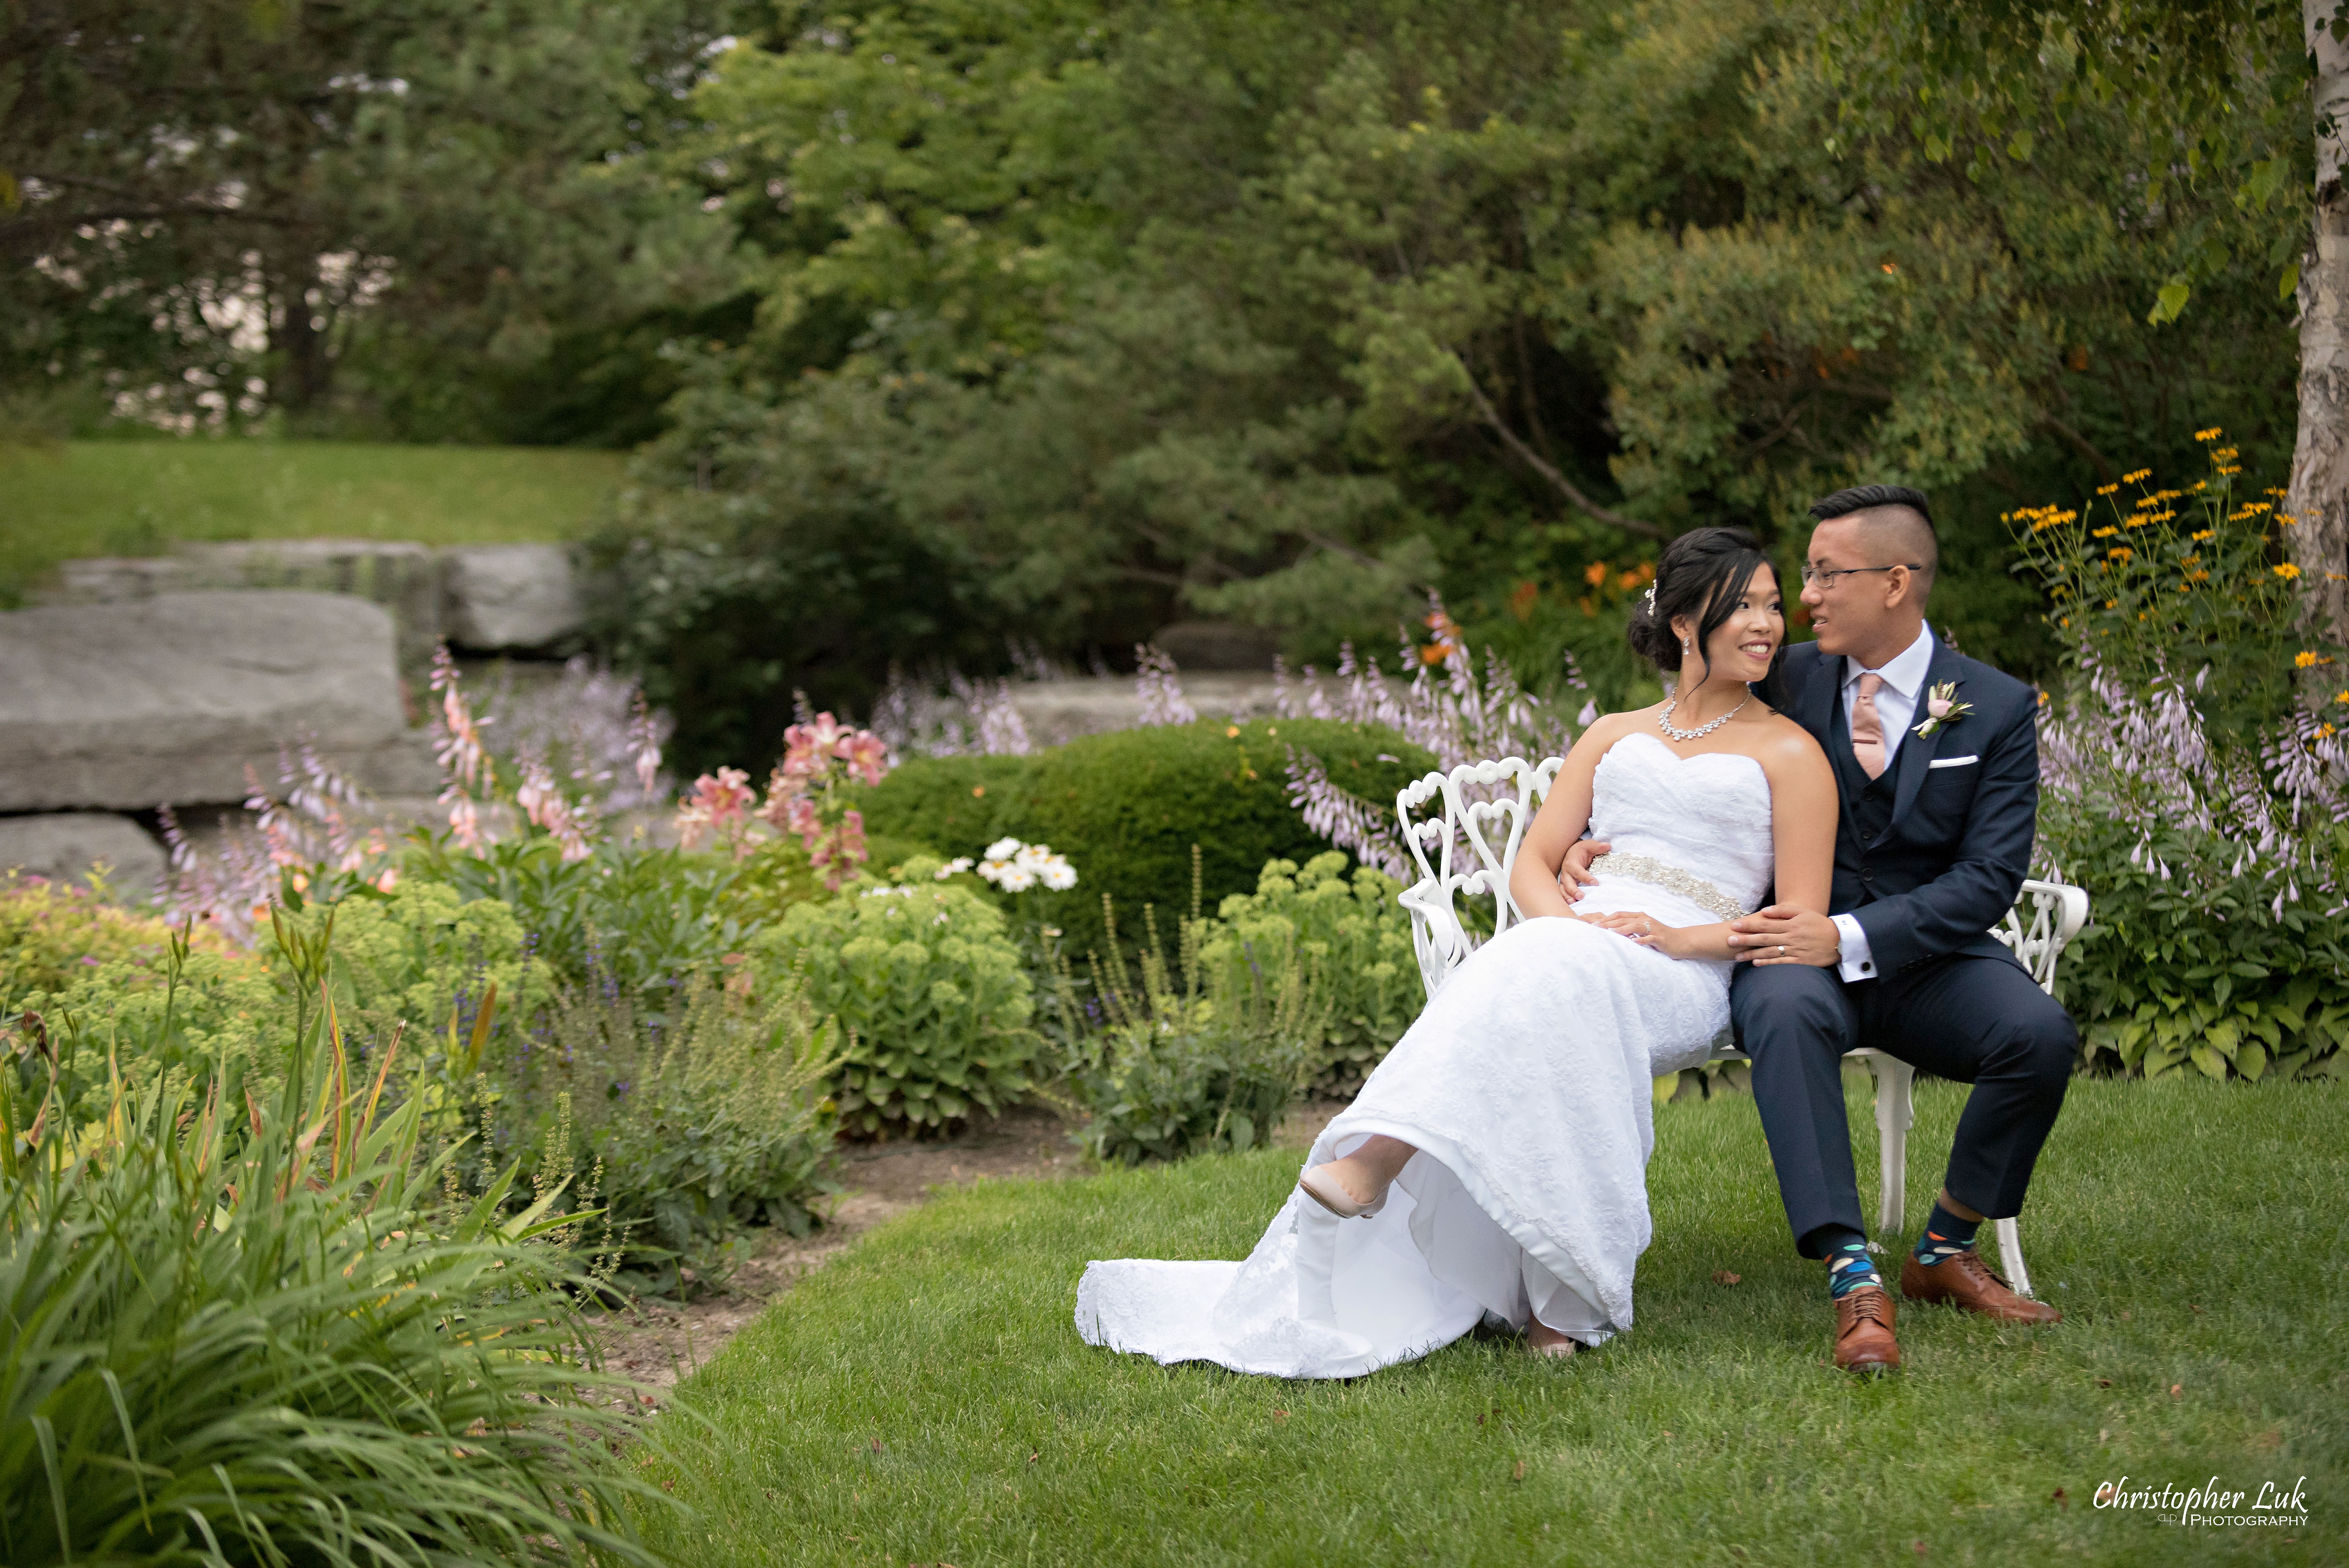 Christopher Luk - Toronto Wedding Photographer - The Manor Event Venue By Peter and Paul's - Main Grand Entrance Trees Walkway Painted White Cast Wrought Iron Bench Seat Bride Groom Golden Hour Creative Portrait Session Natural Candid Photojournalistic Seated Sitting Hug Smile